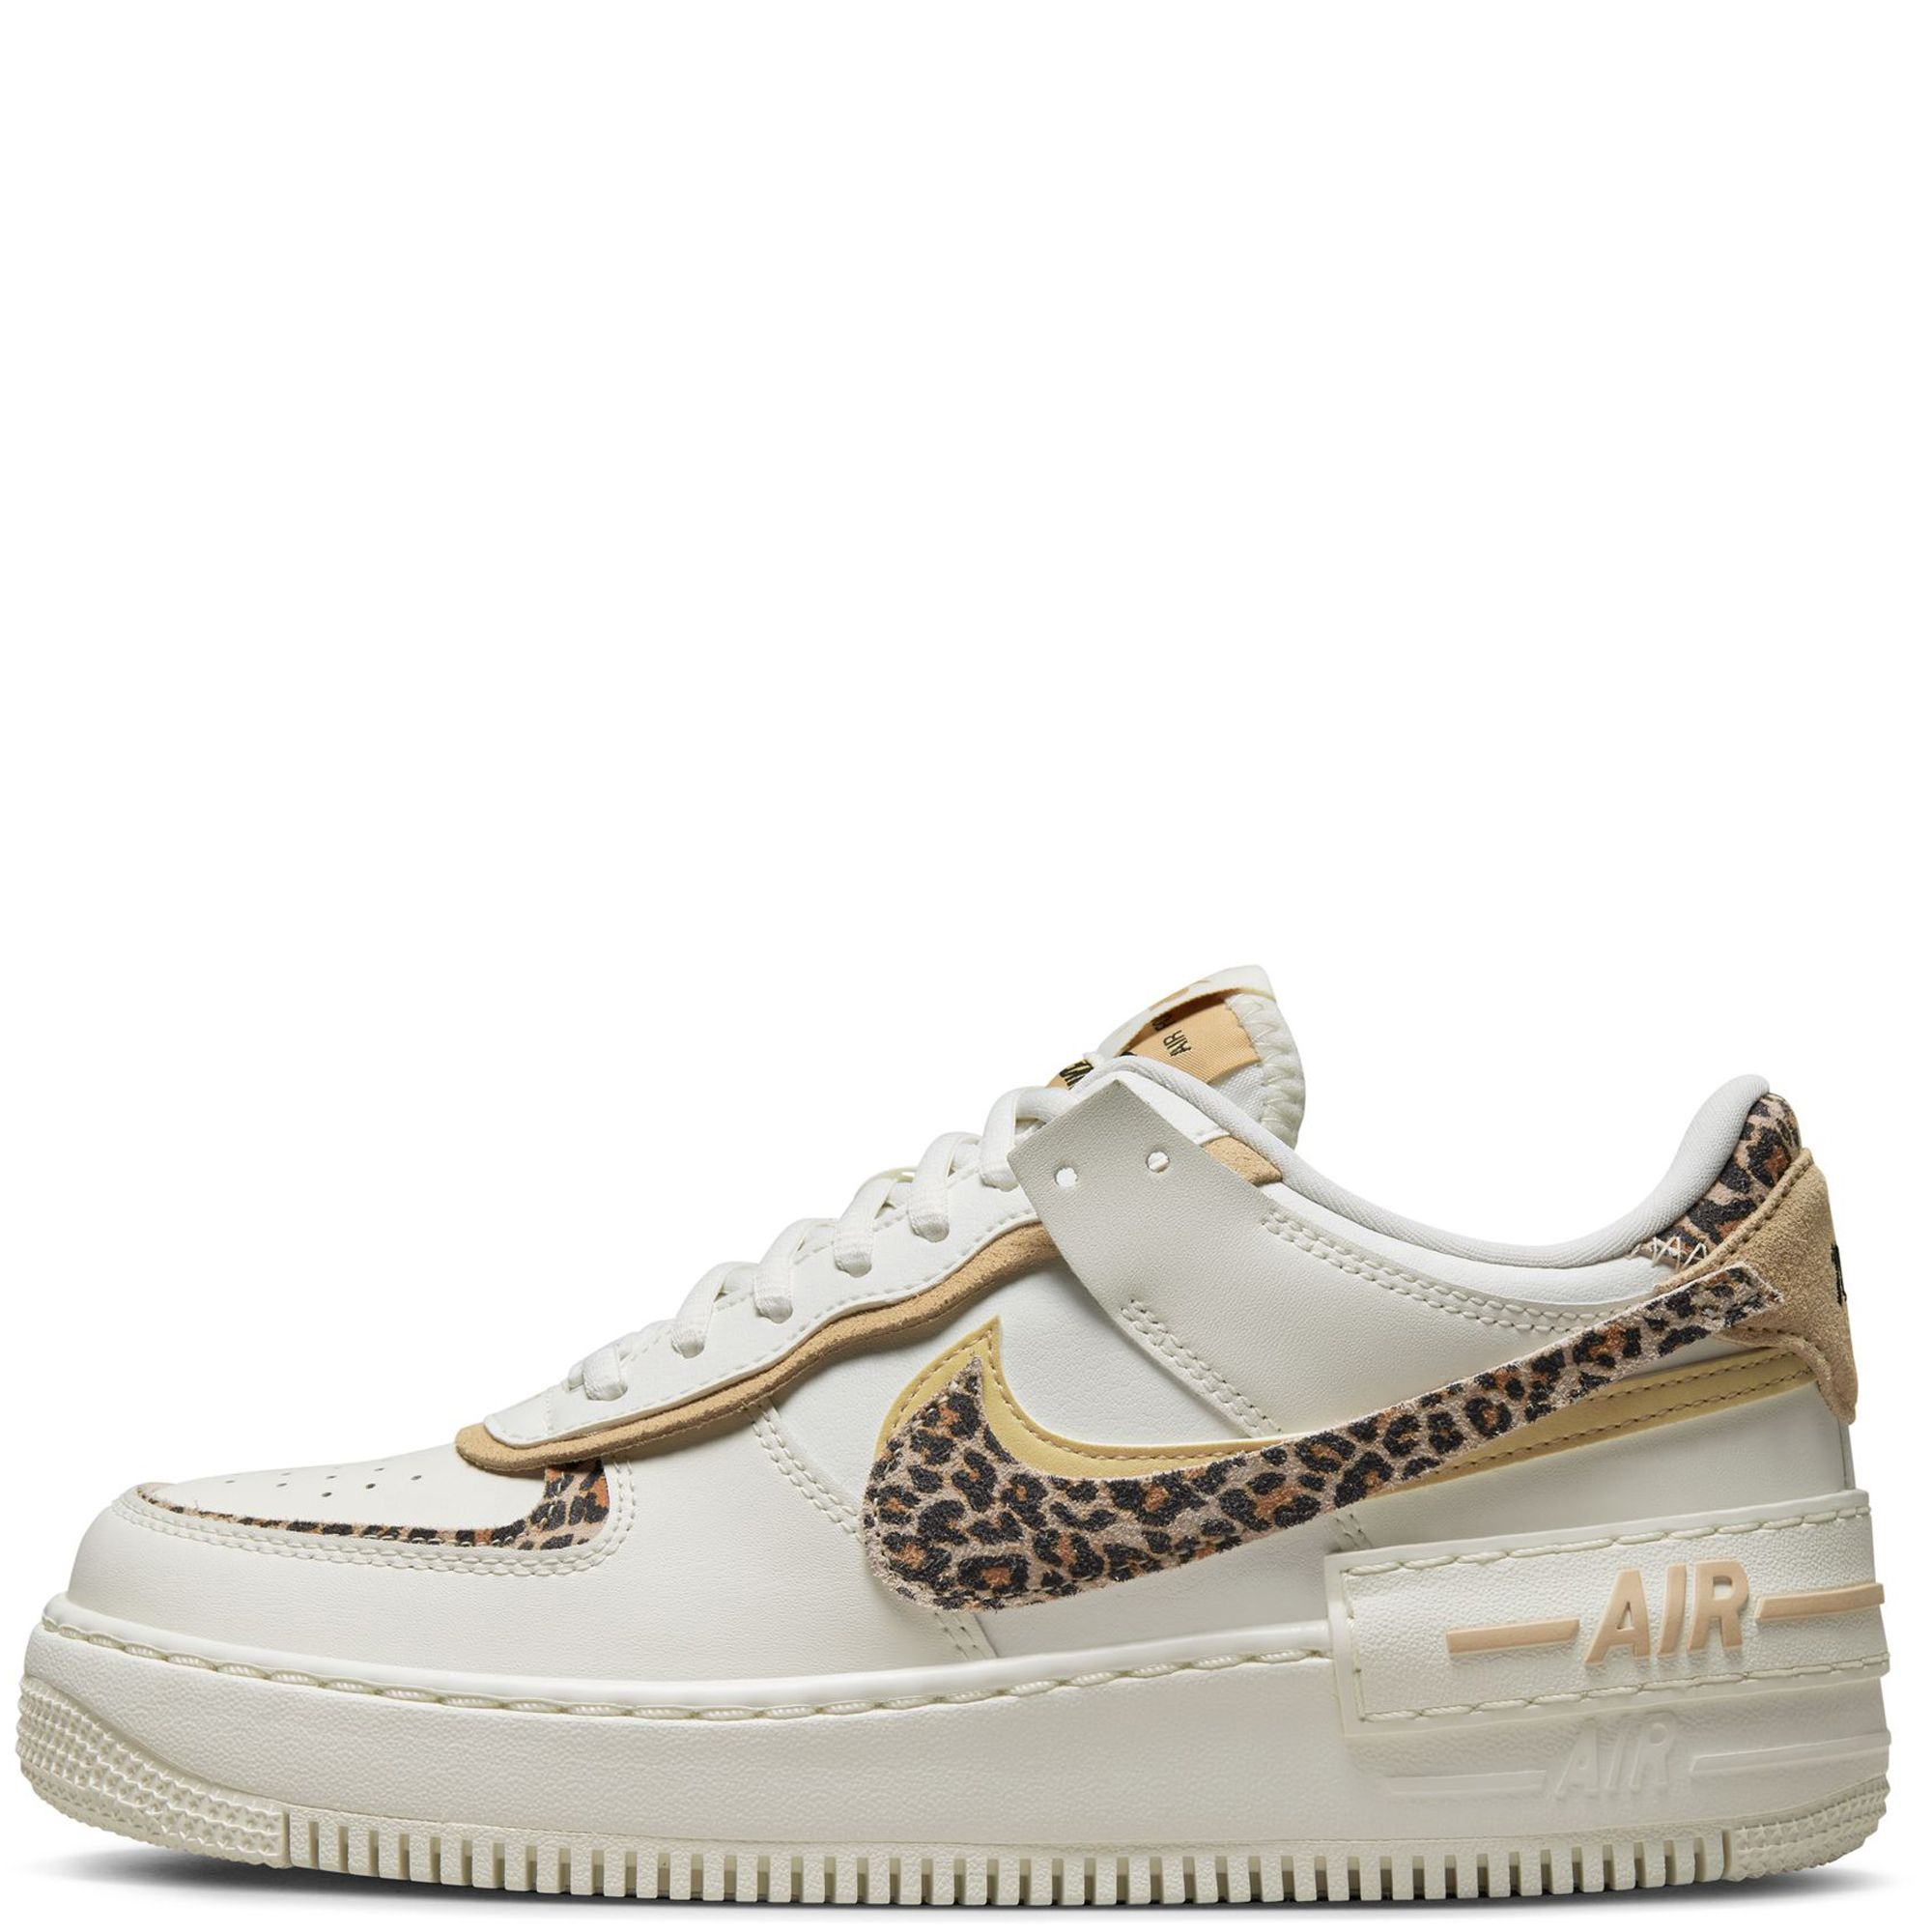 Nike Air Force 1 Shadow Women's Shoes